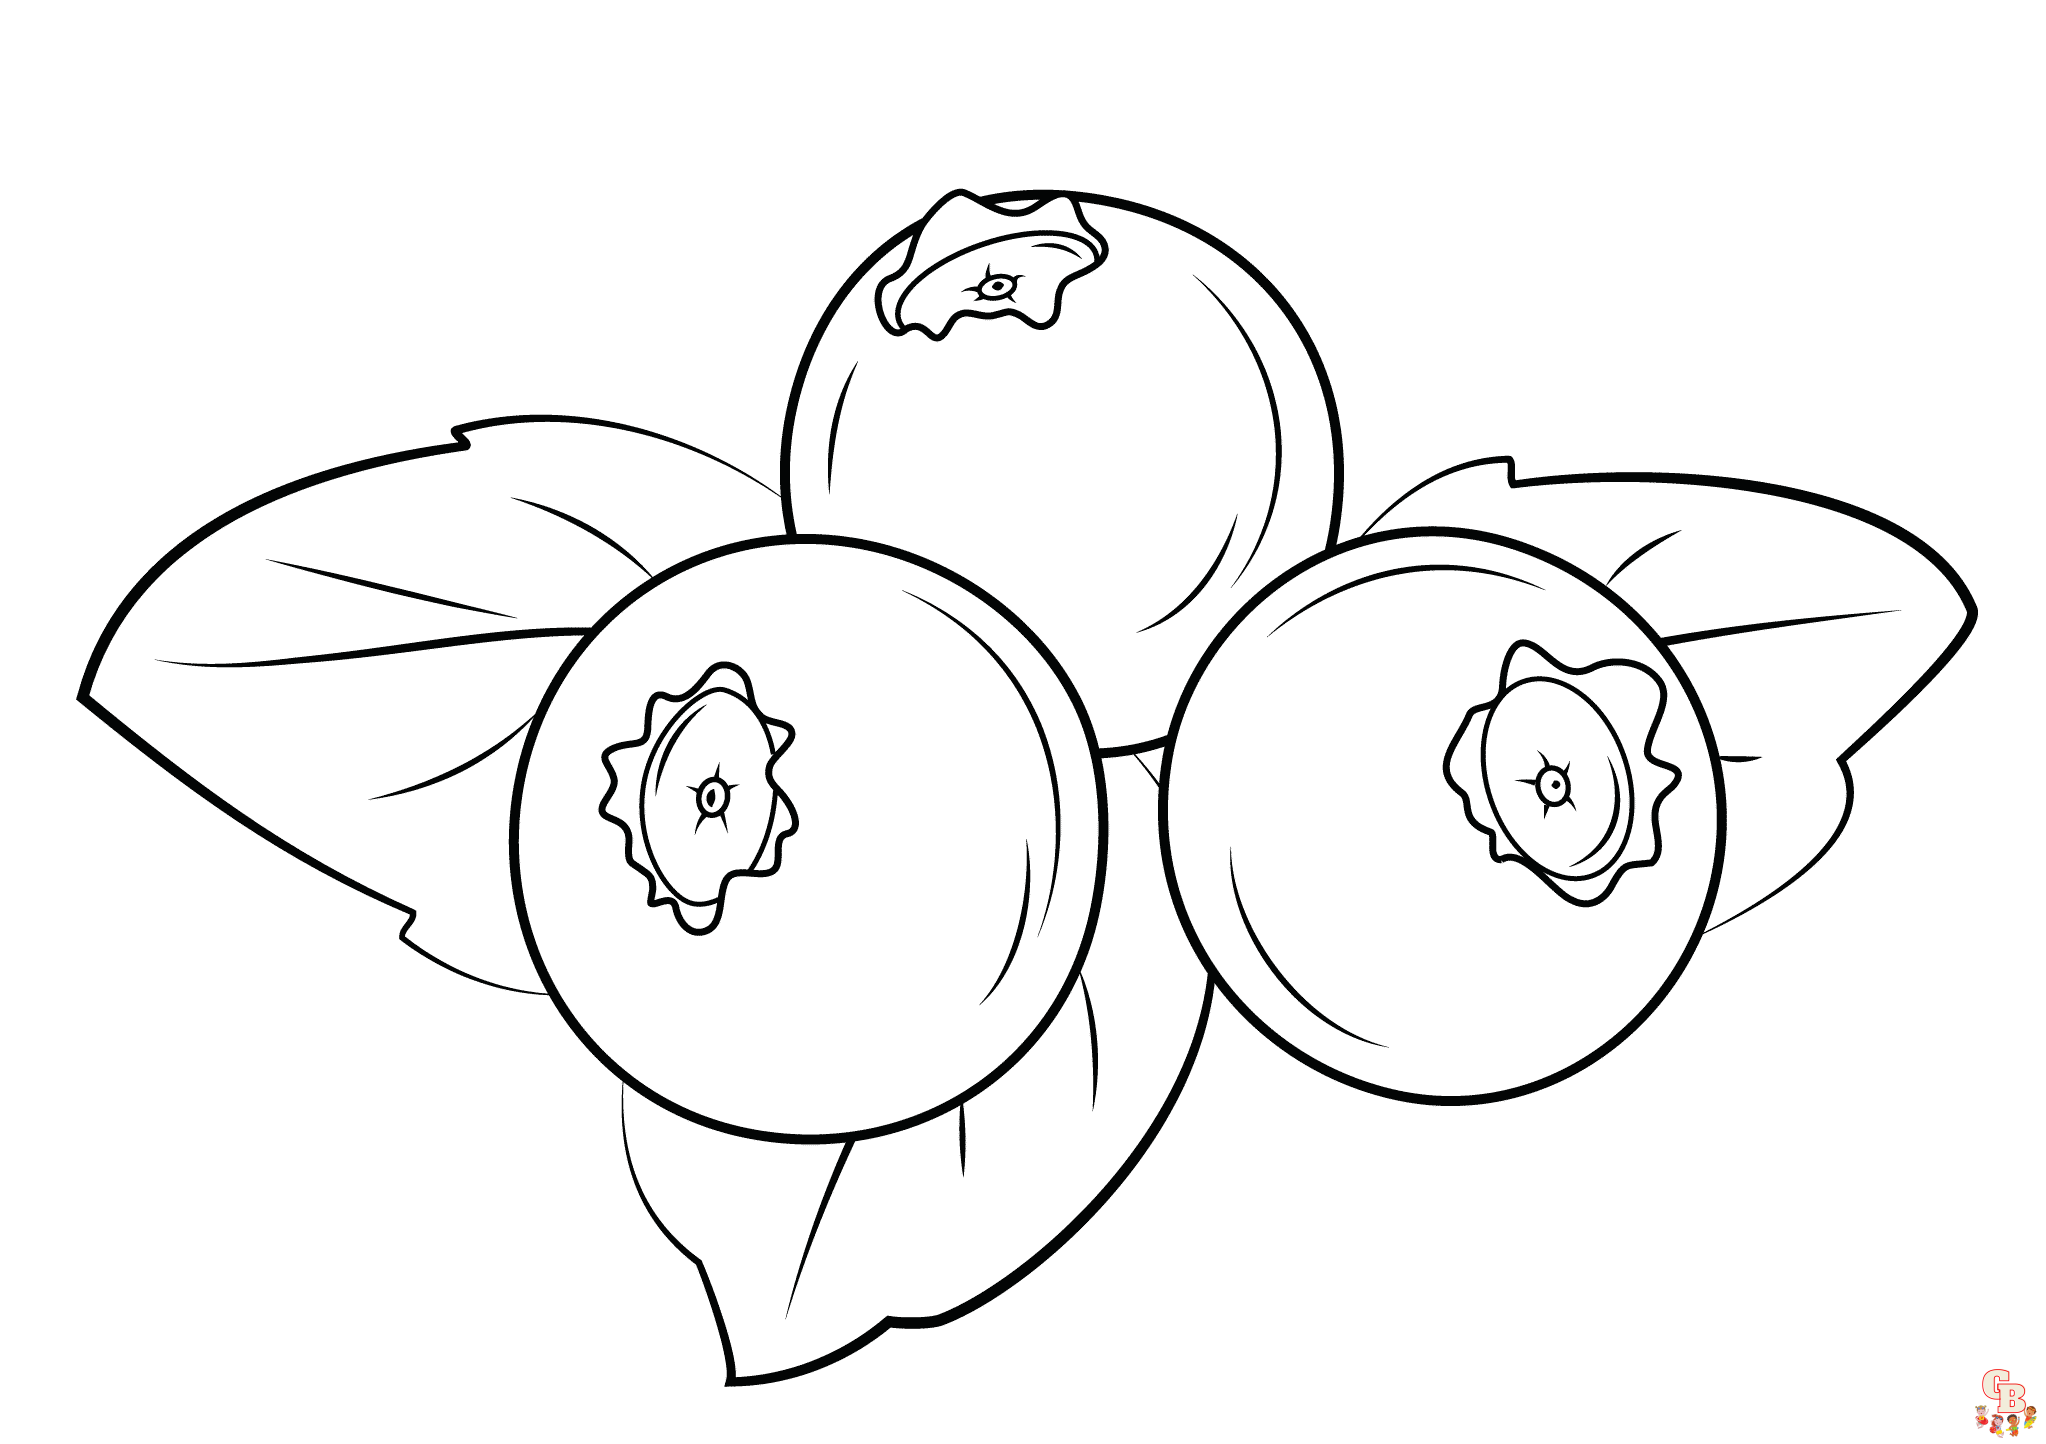 Blueberry Coloring Sheets free